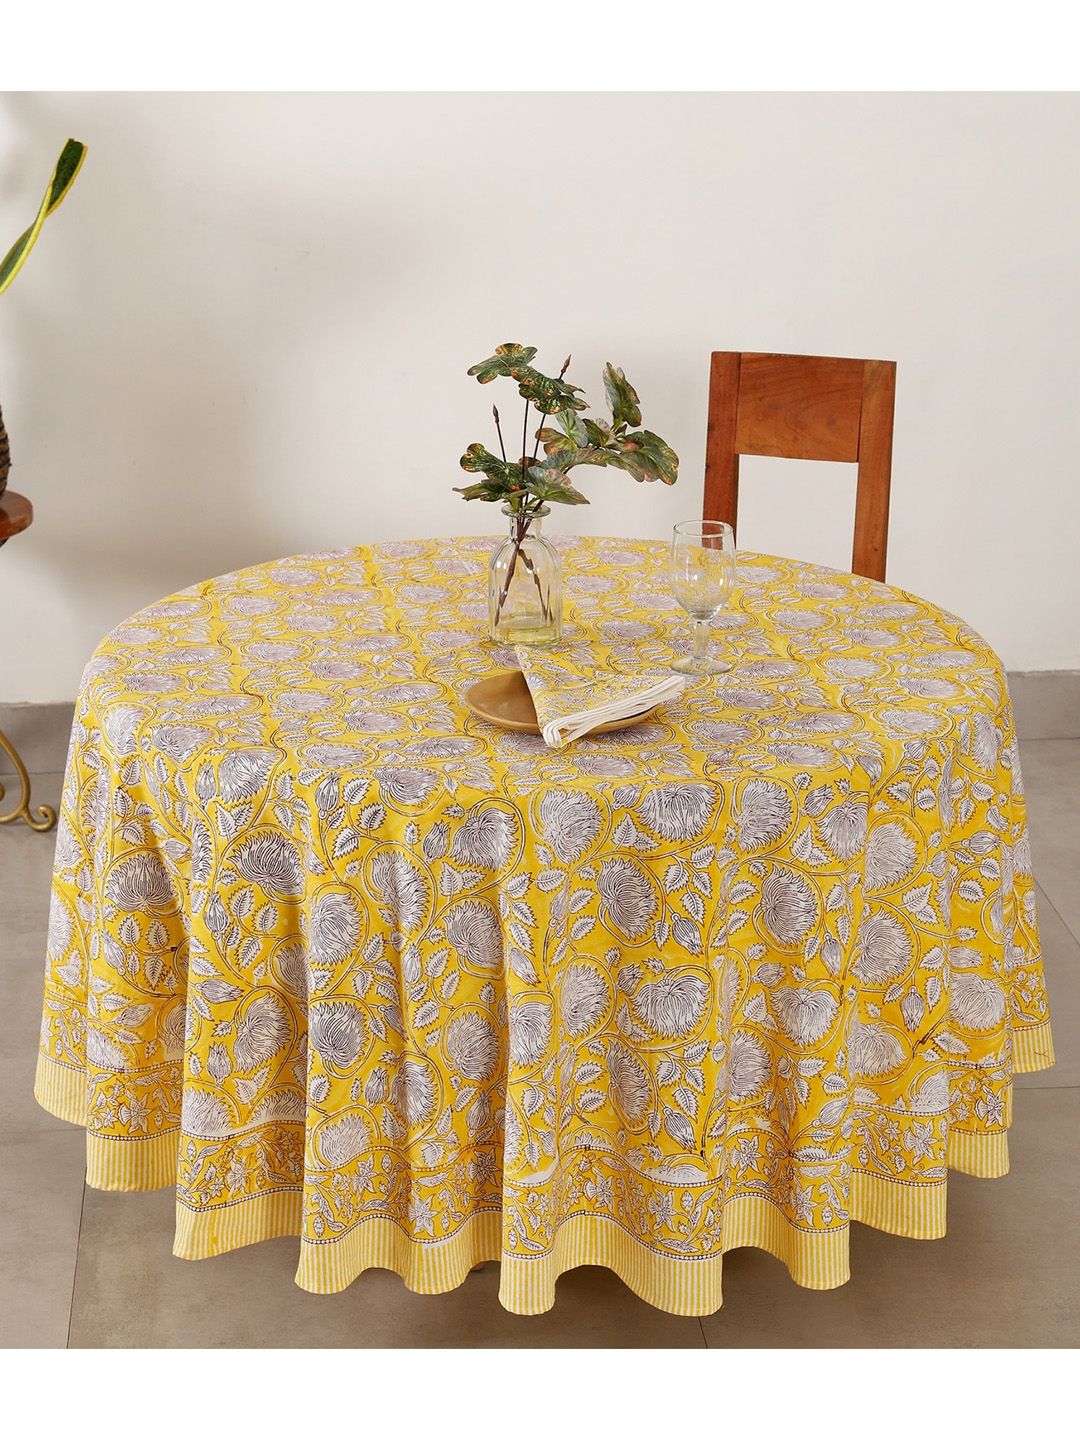 HANDICRAFT PALACE Yellow & White Floral Printed Pure Cotton Round Table Covers With 4 Napkins Price in India